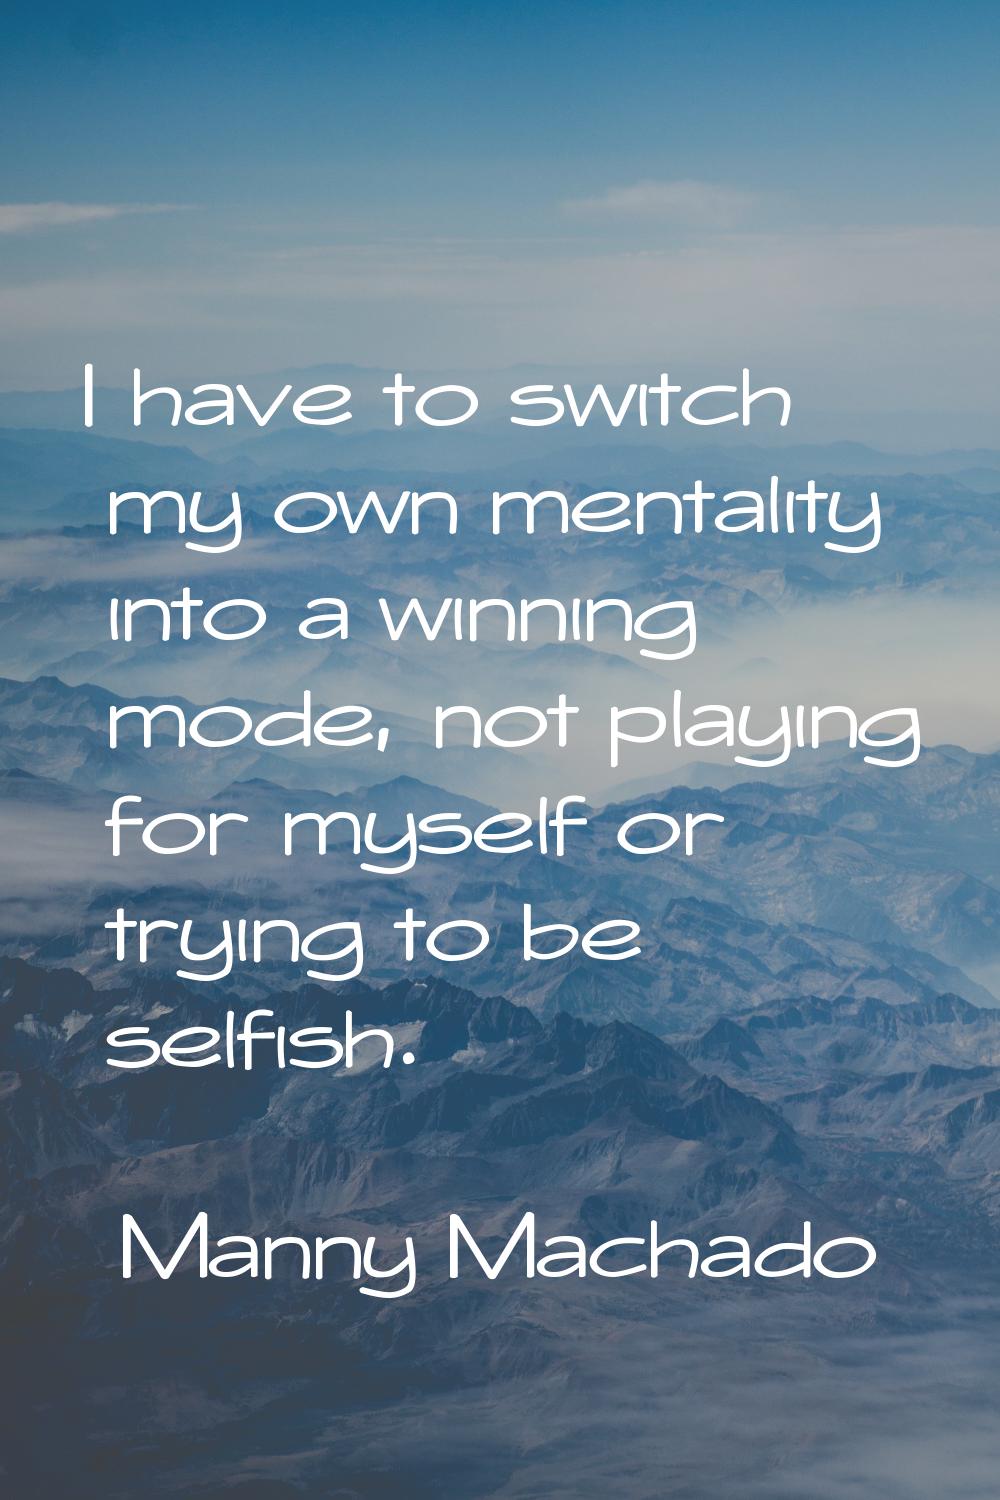 I have to switch my own mentality into a winning mode, not playing for myself or trying to be selfi